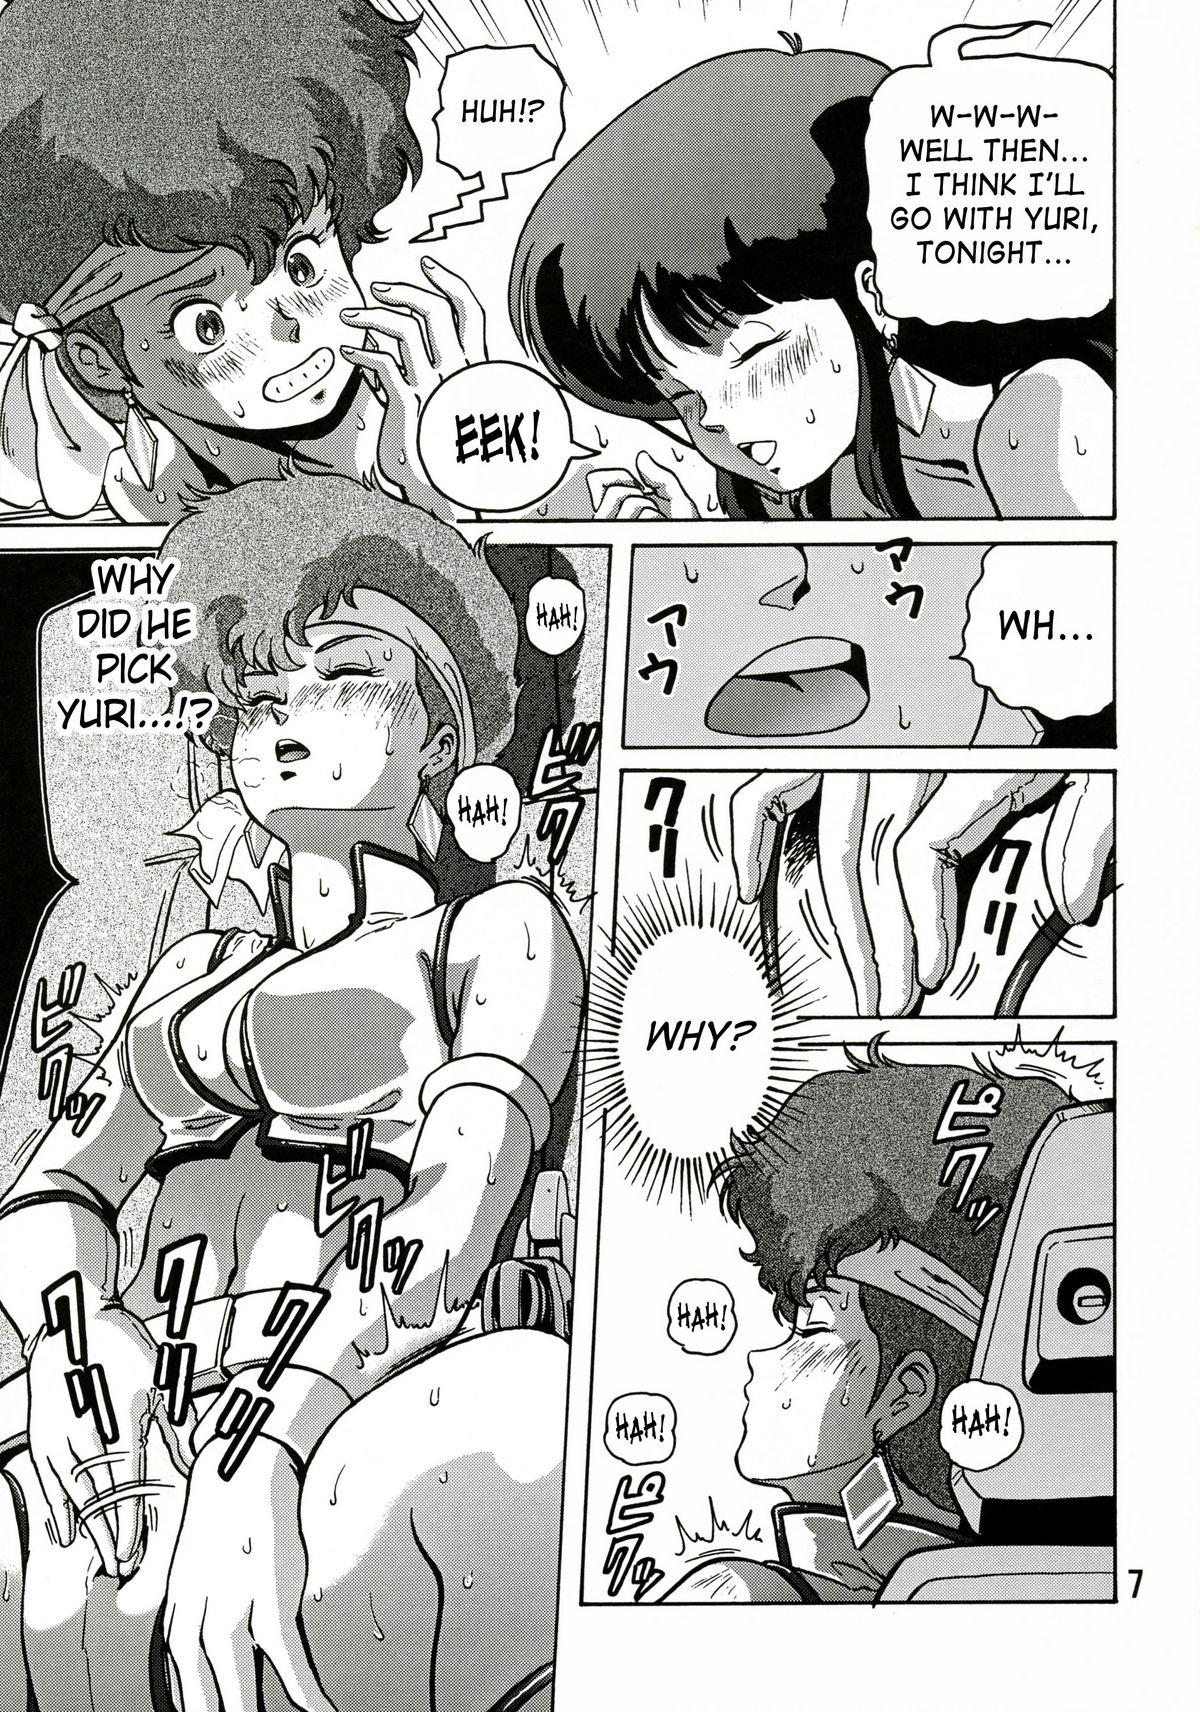 With Love Angel 2 - Dirty pair Oiled - Page 6